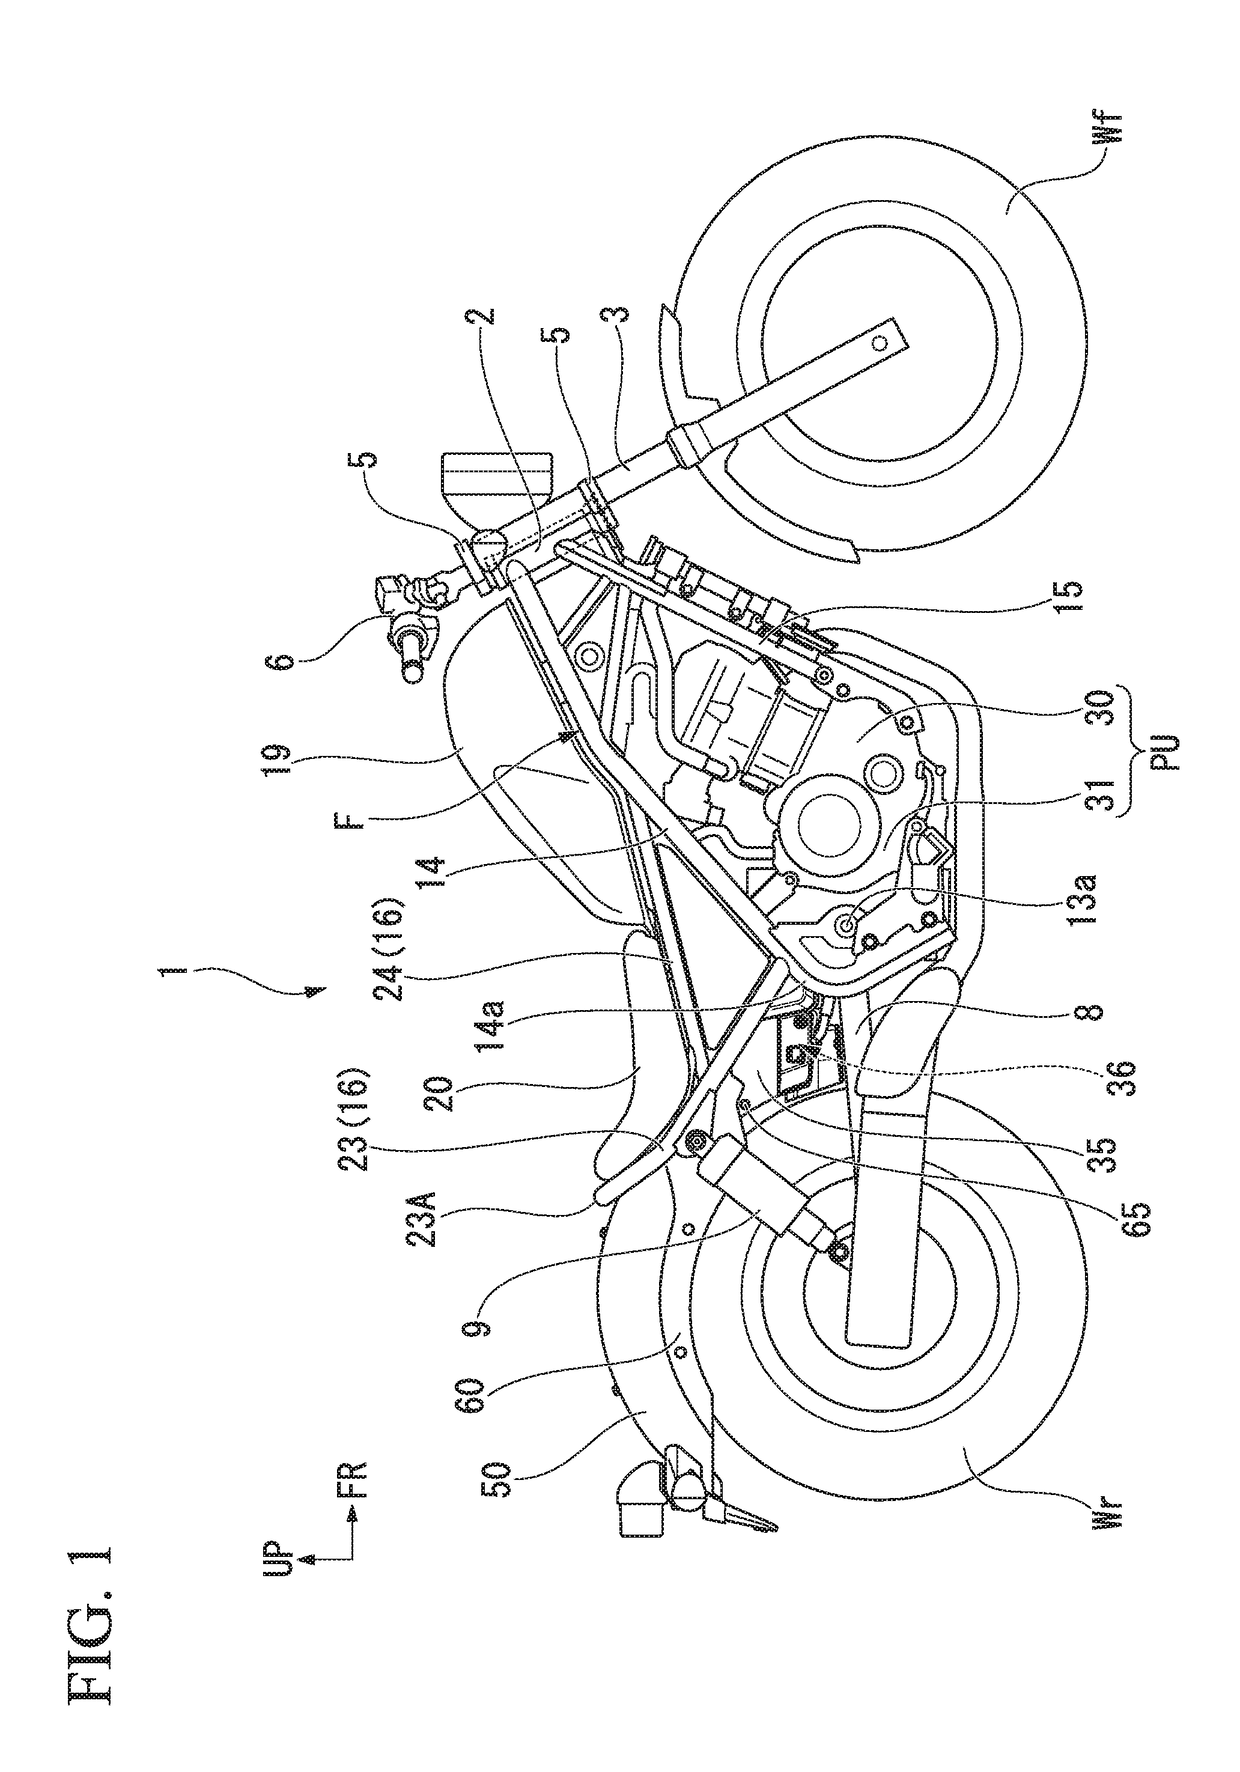 Reservoir tank mounting structure of saddle riding vehicle